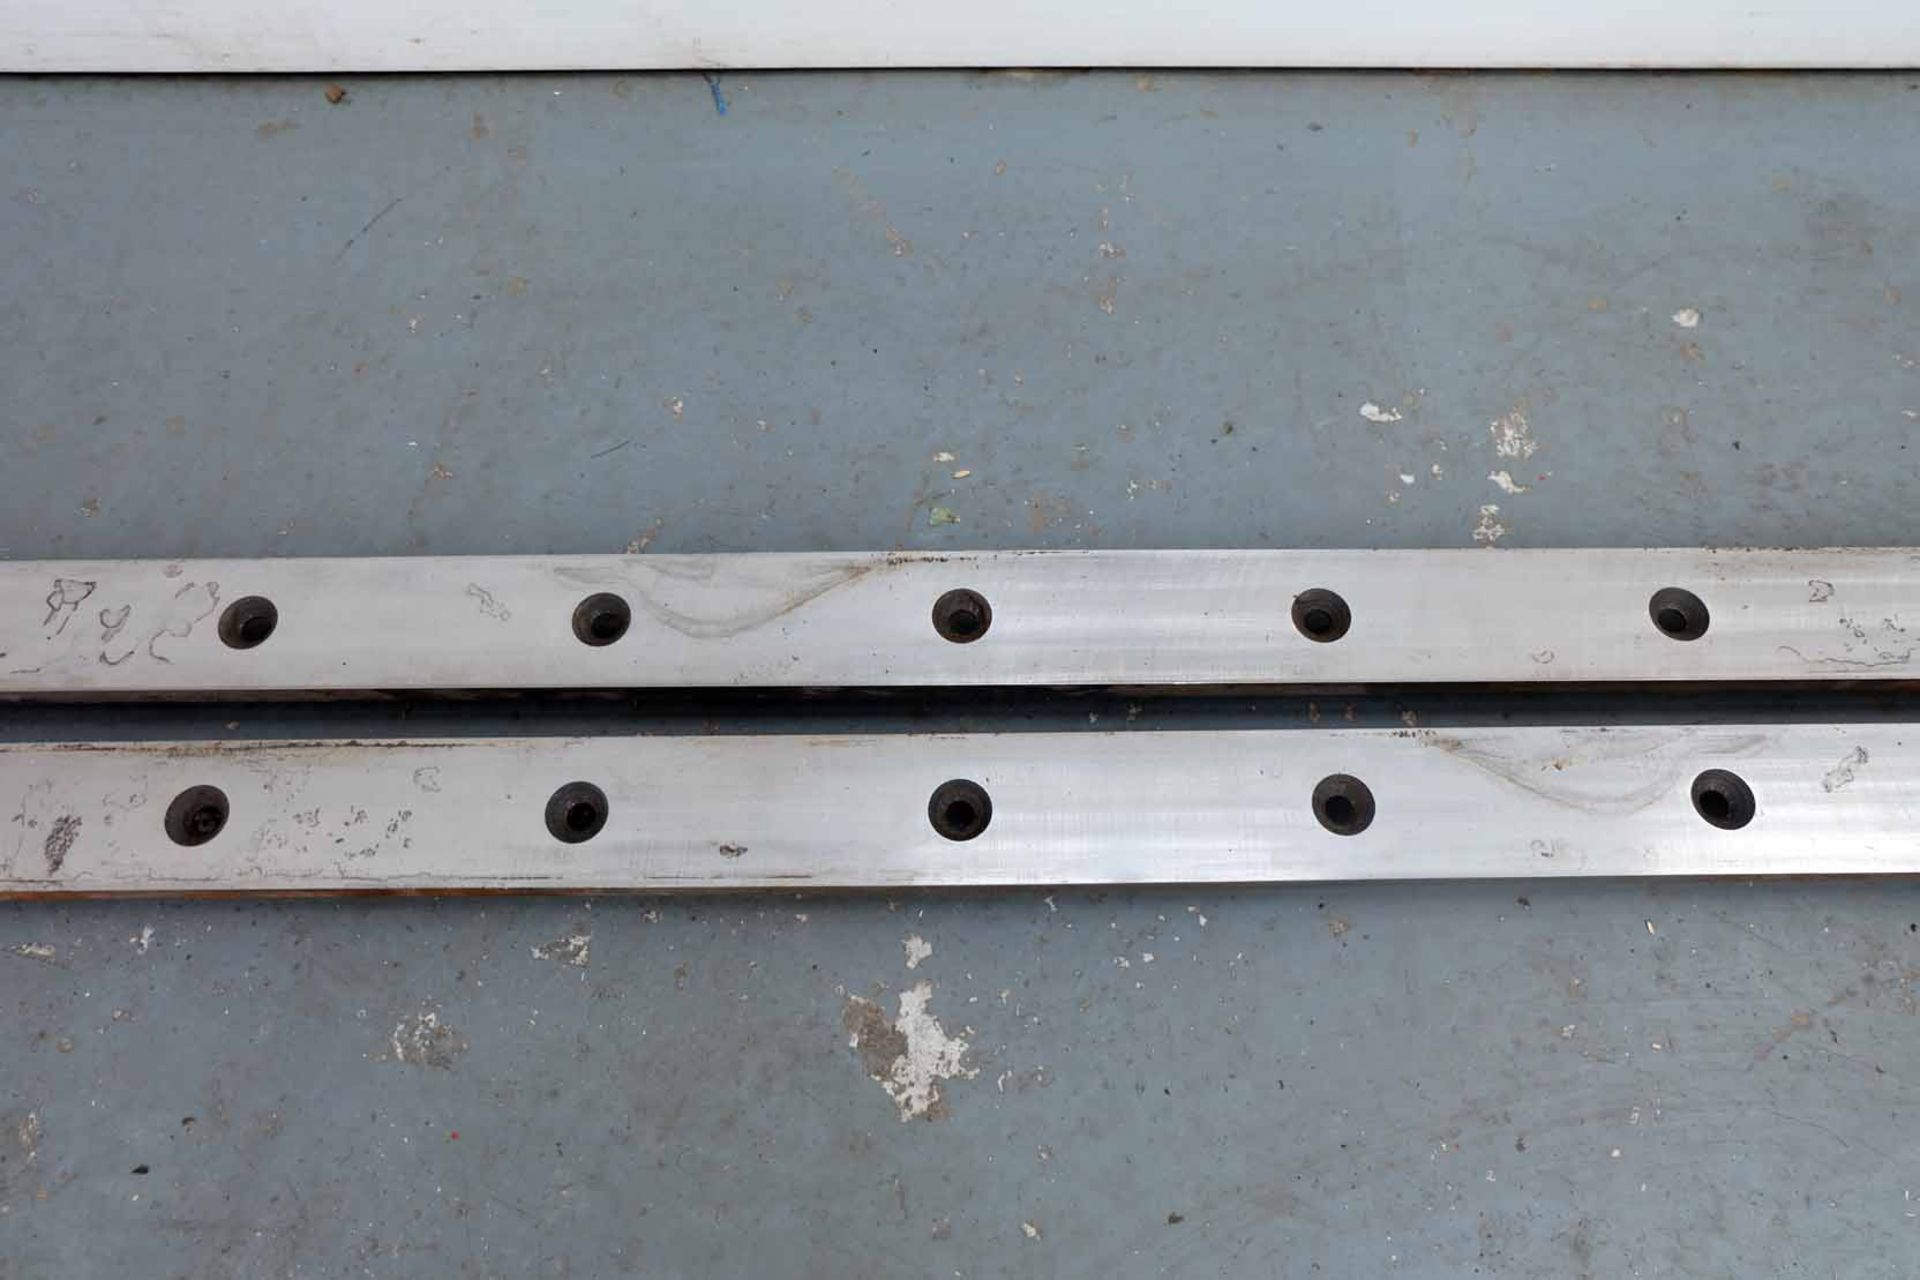 Pair of Guillotine Blades. Length 2034mm. Dimensions 62mm x 15mm. Double Sided. 14 Holes Counter Sun - Image 3 of 5